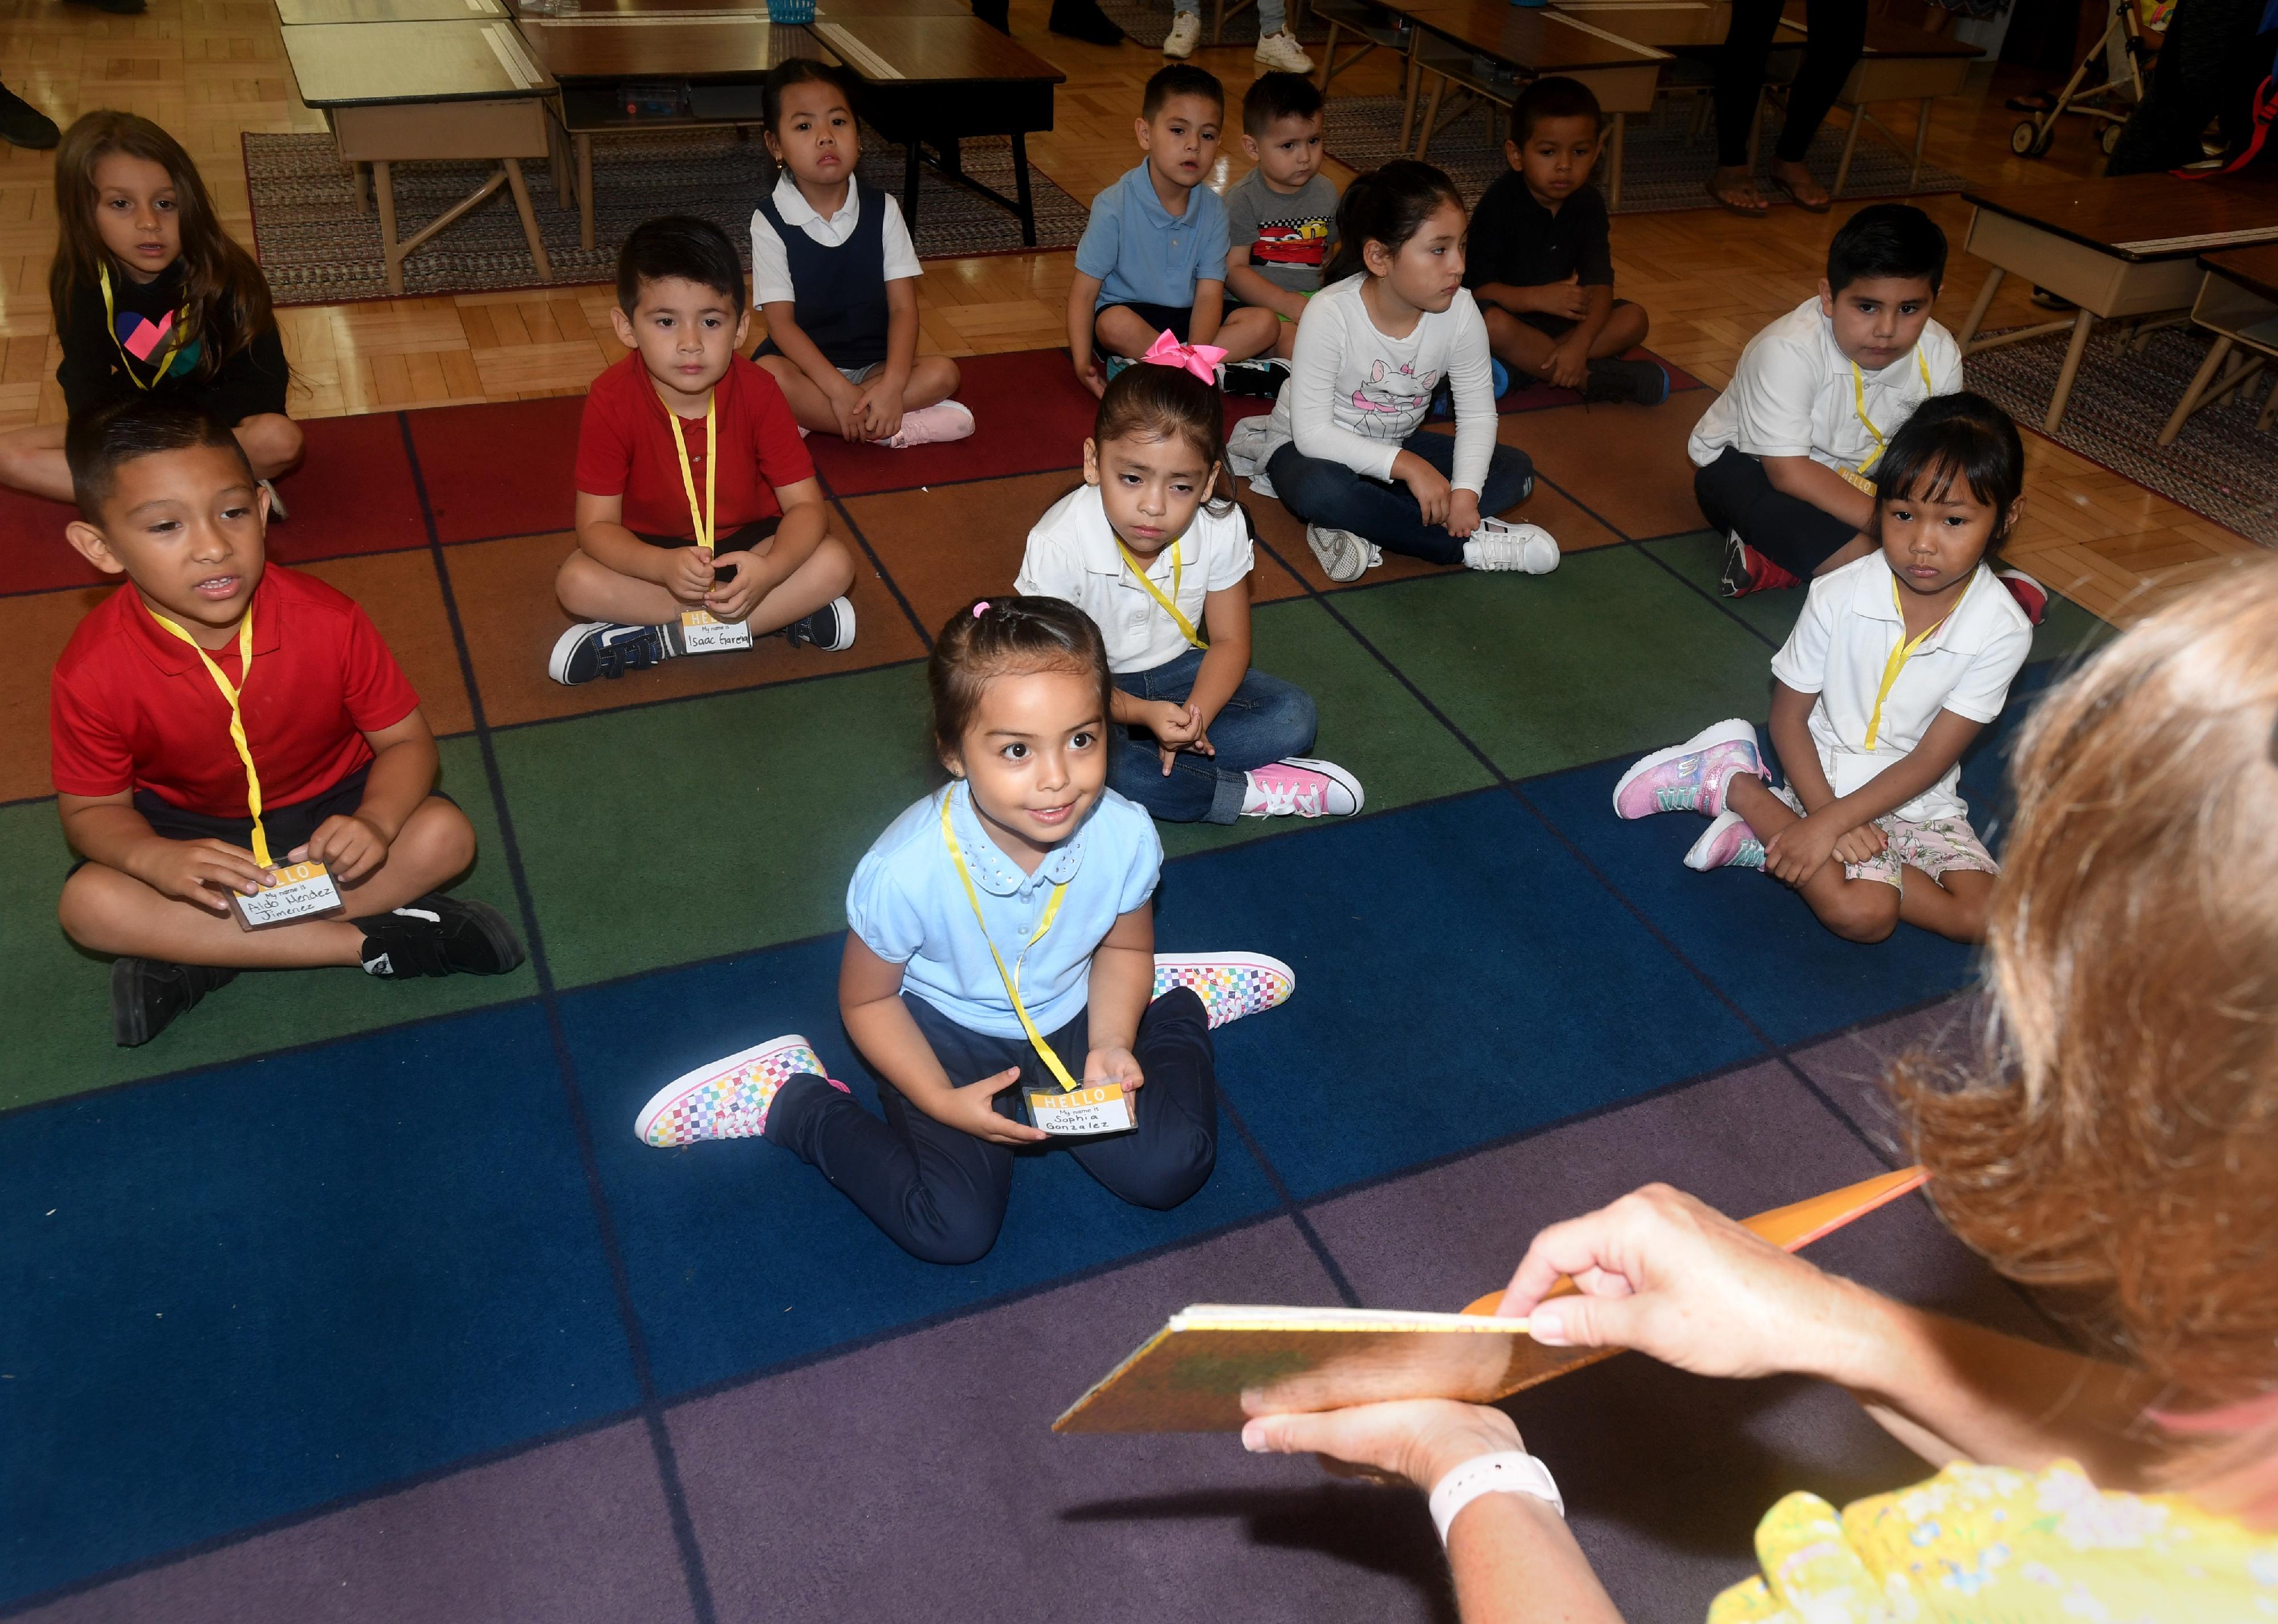 Students gathered around a teacher reading a book.